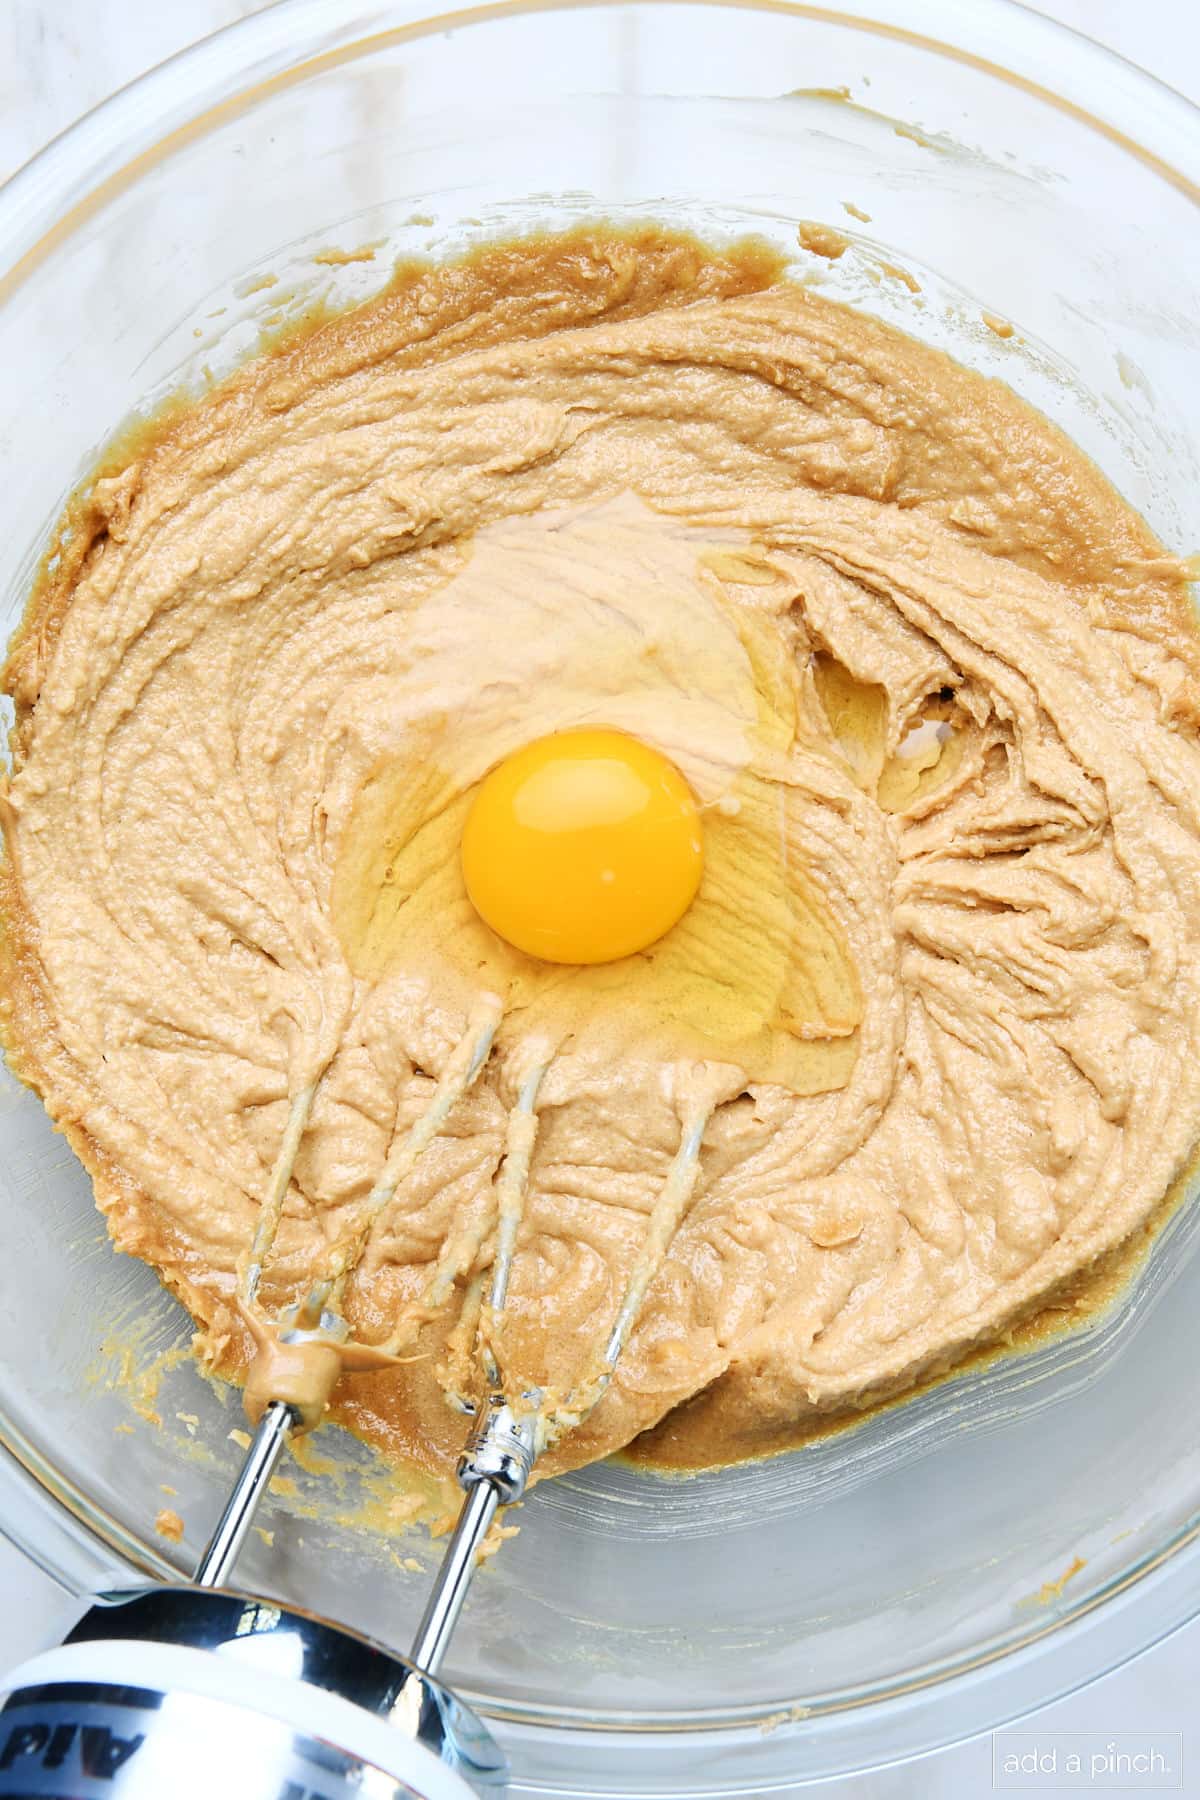 Creamed peanut butter and sugar mixture with egg in a mixing bowl.